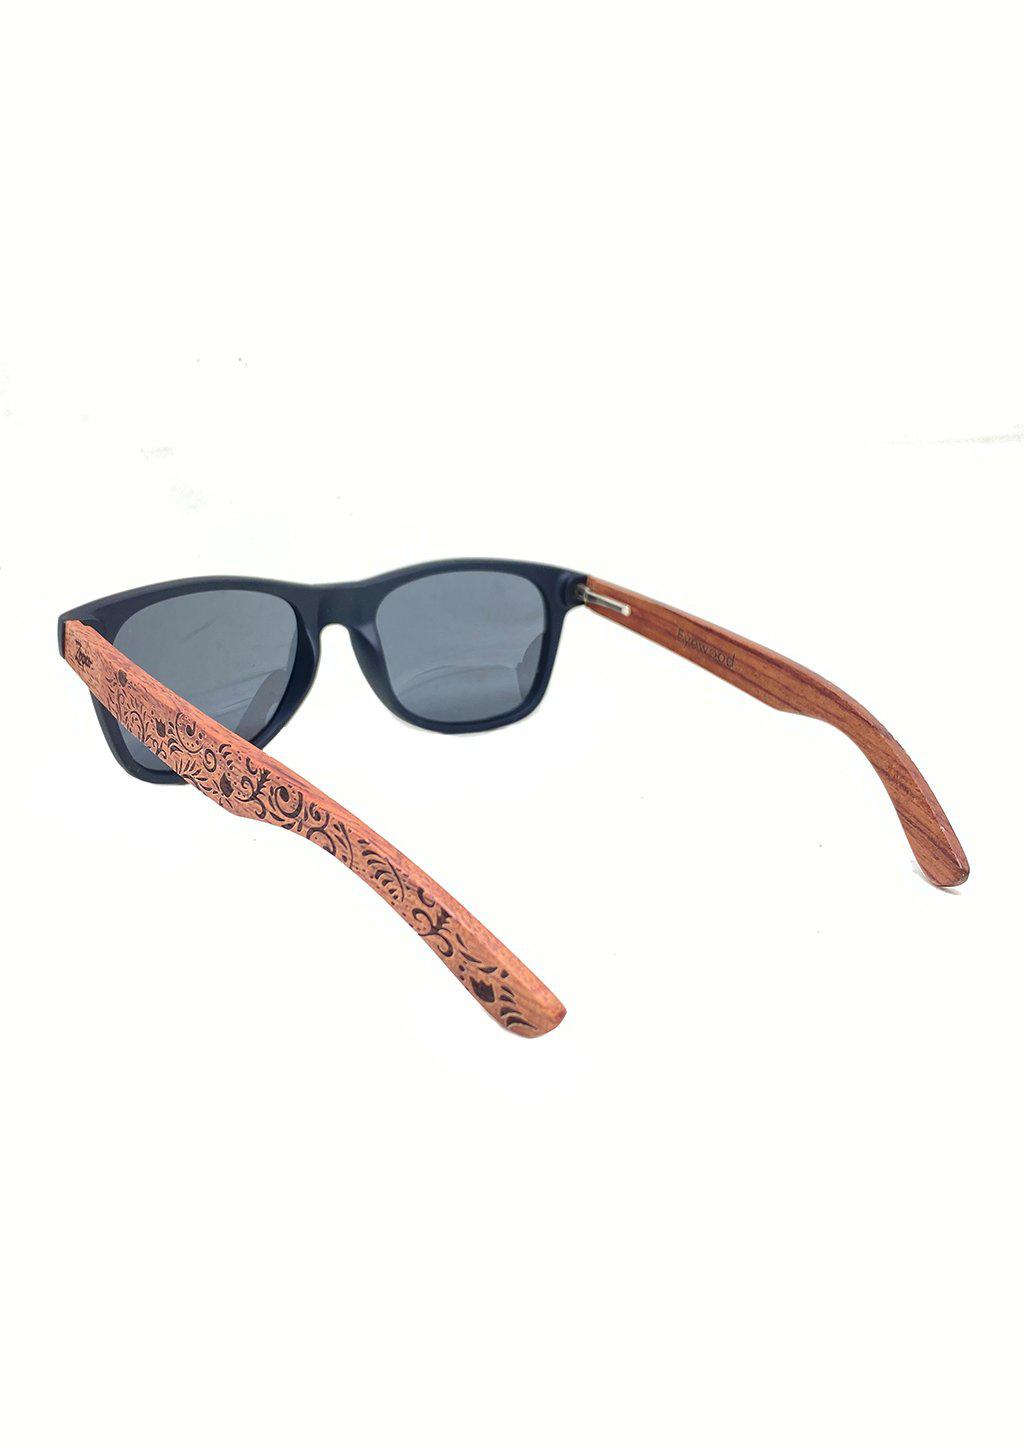 Engraved wooden sunglasses handmade with floral pattern from Zerpico.